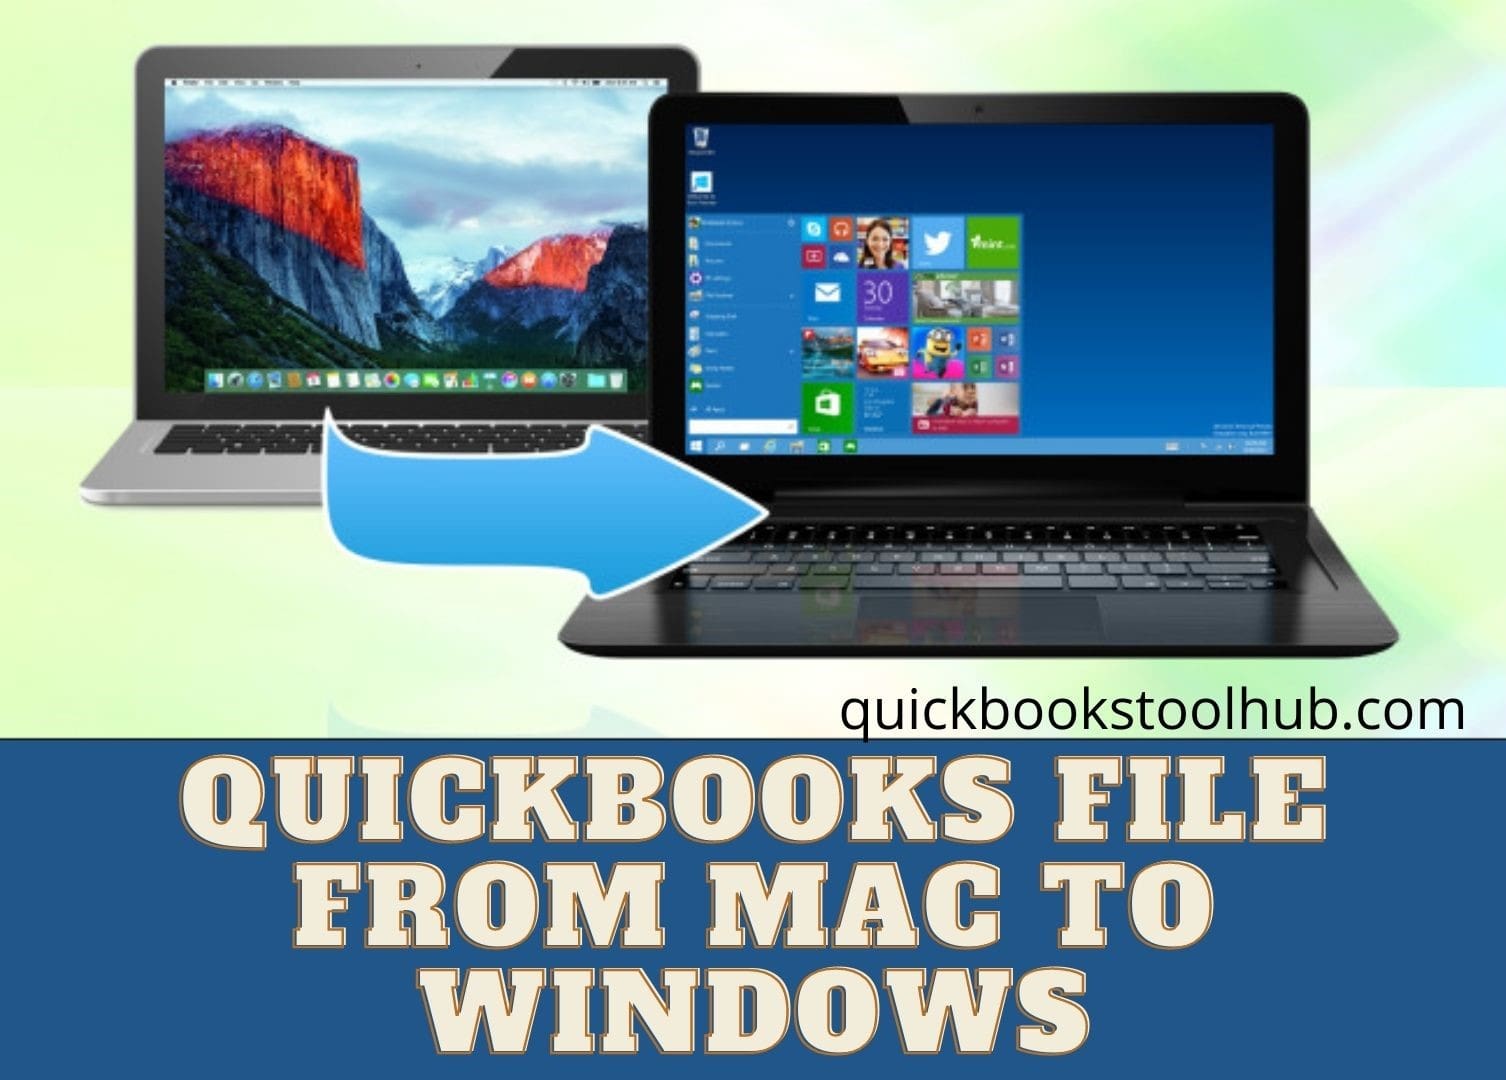 How to Convert Quickbooks File From Mac to Windows- Steps